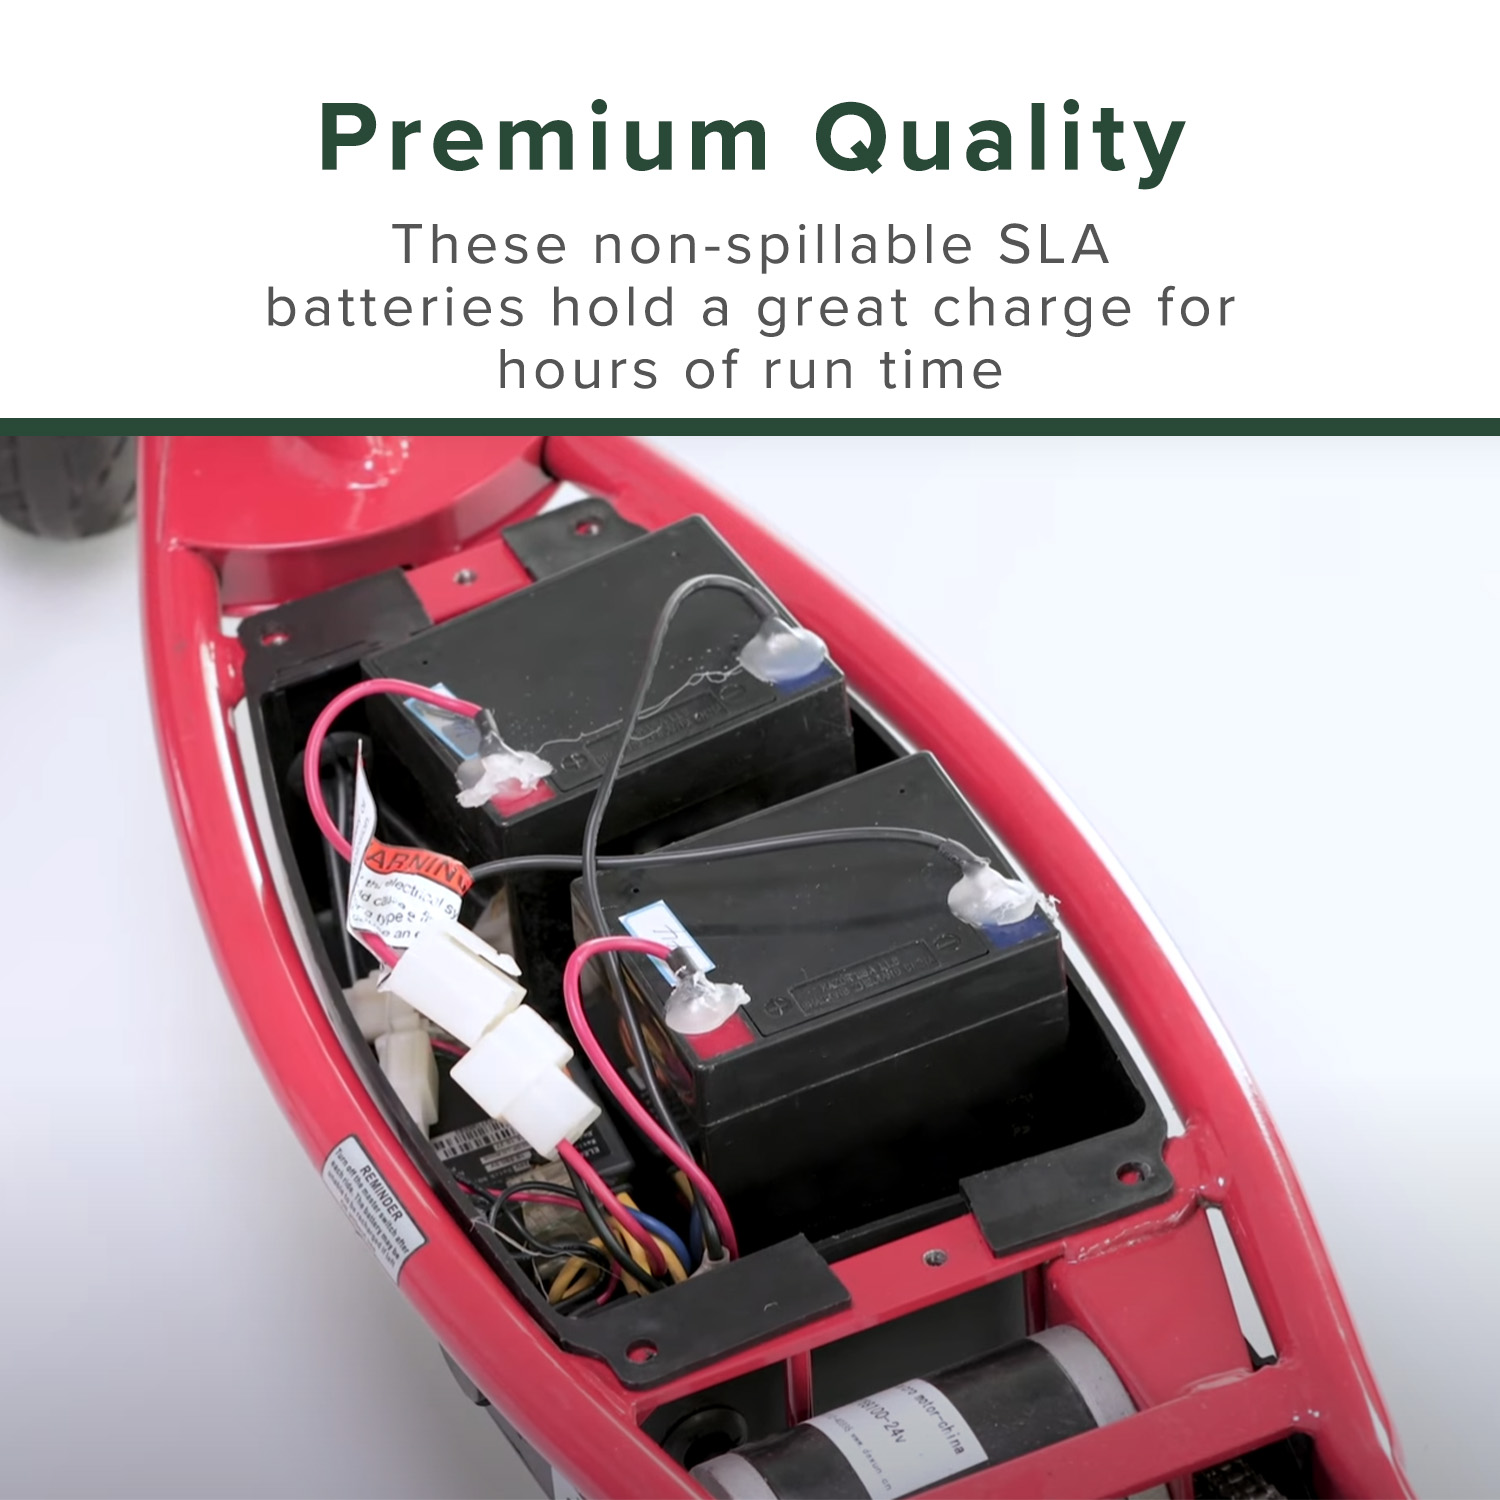 AlveyTech 24 Volt Battery Pack (Versions 1-7) - For the Razor E100, E100 Glow, E125 Electric Scooter - image 2 of 9